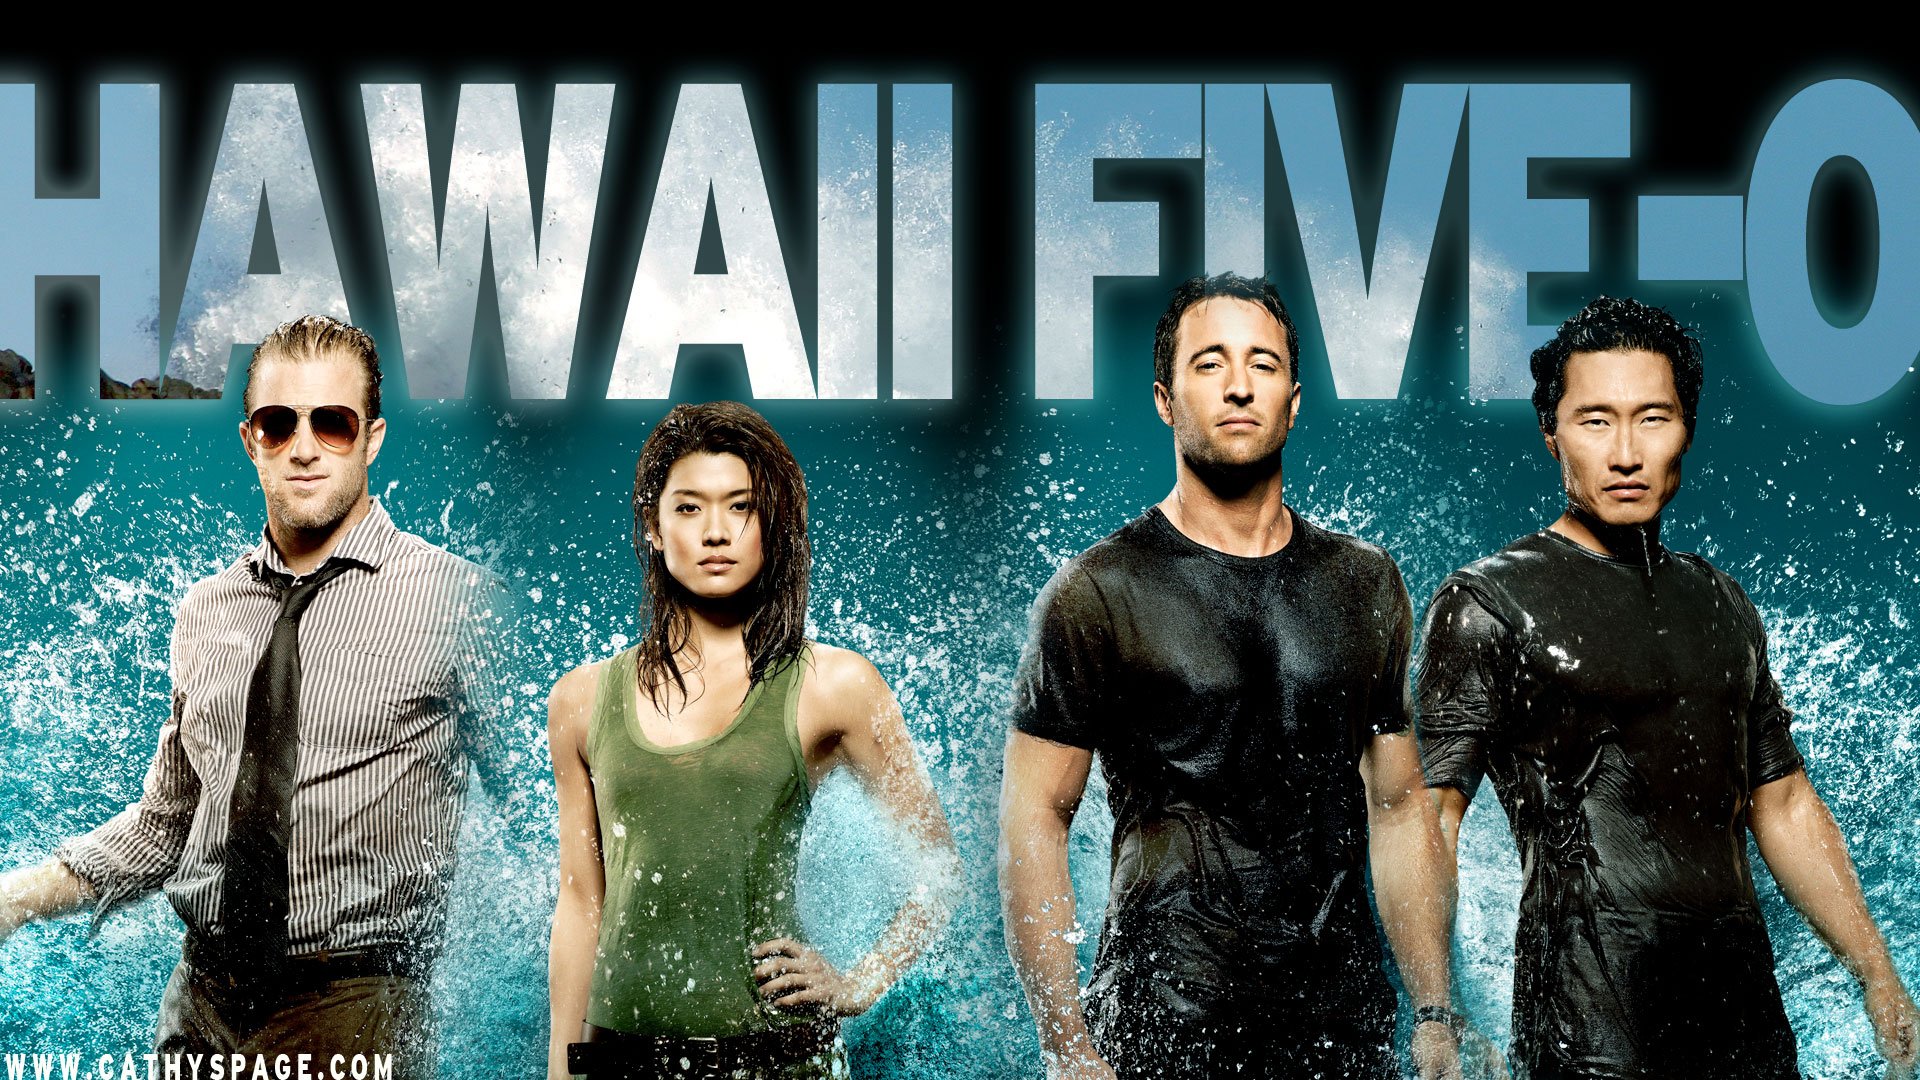 Hawaii Five Action Crime Drama Wallpaper Background